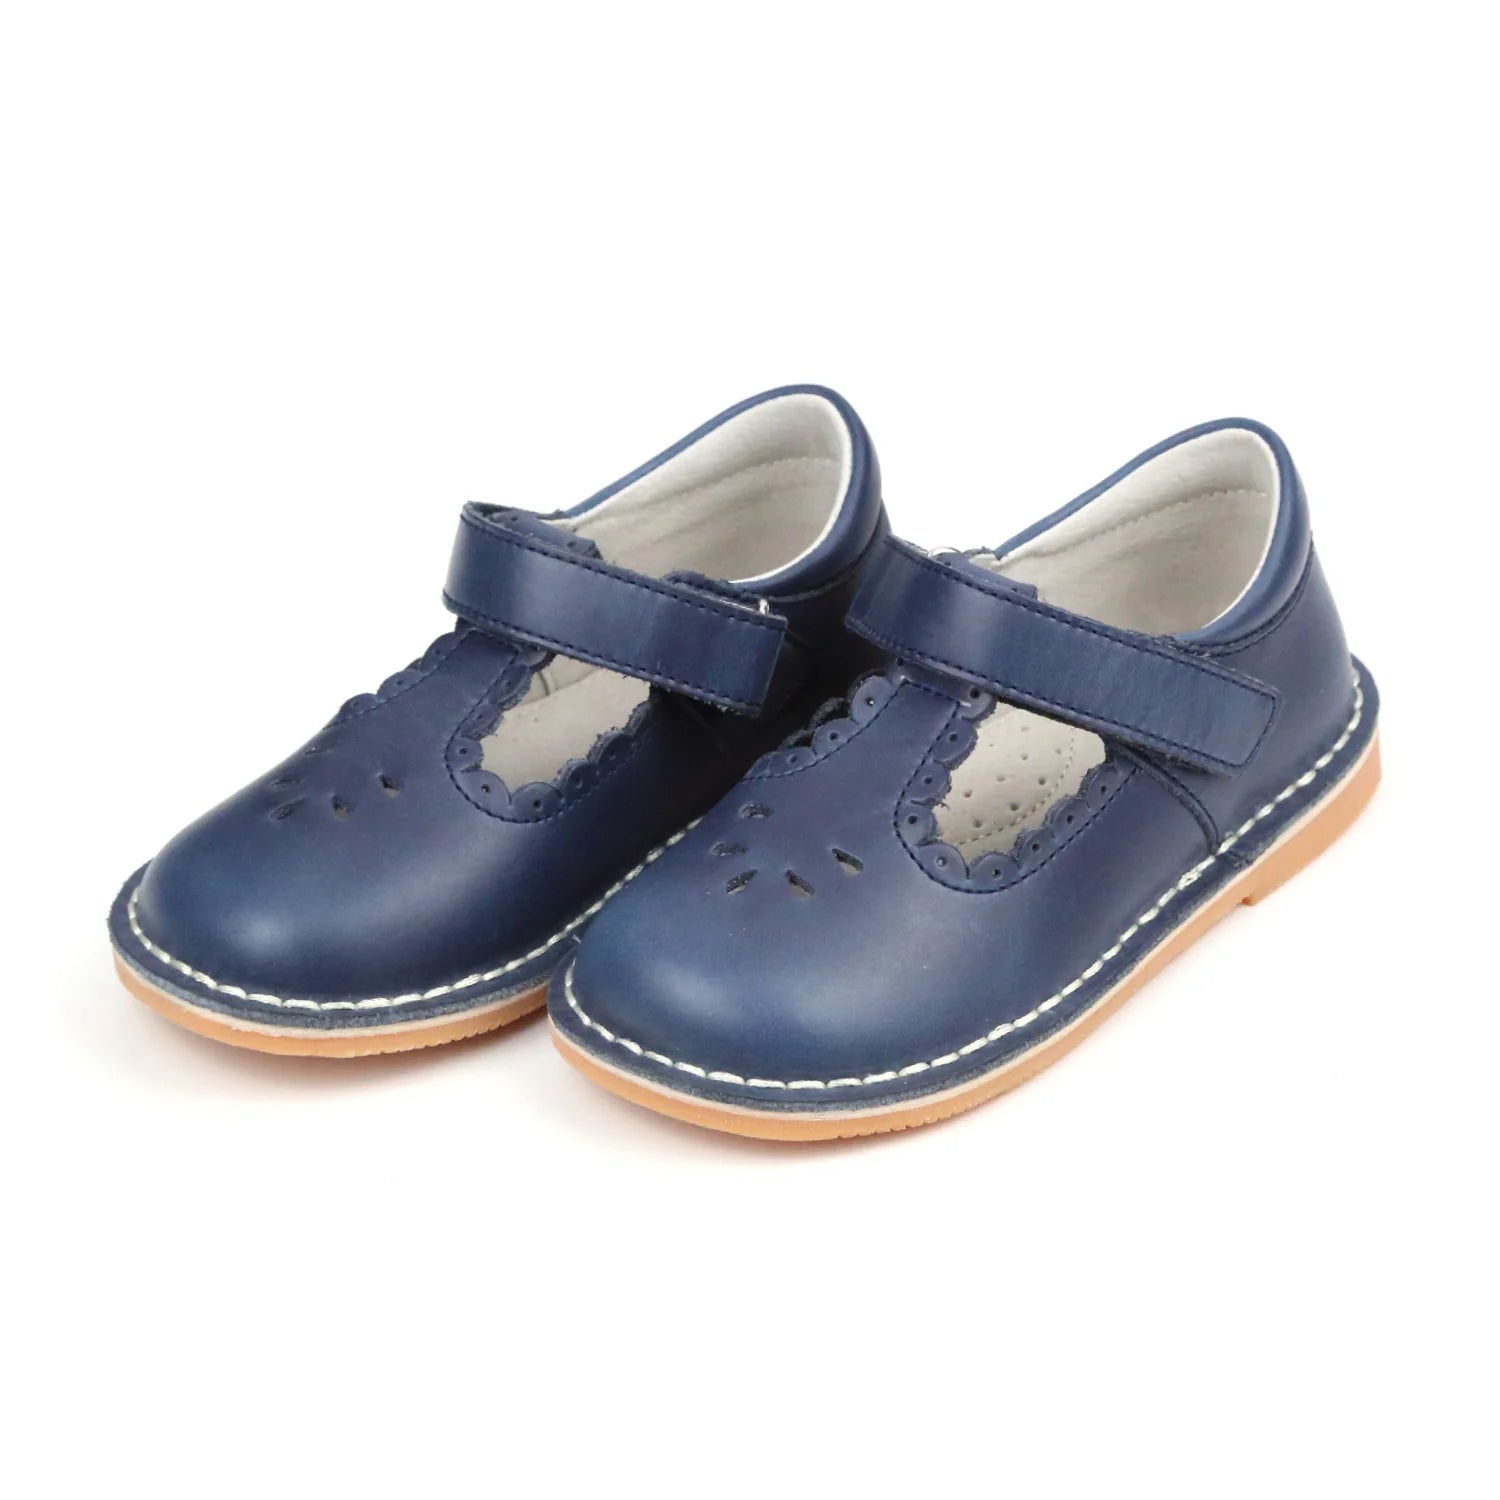 L'AMOUR Angie Scalloped T-Strap Mary Jane - Navy